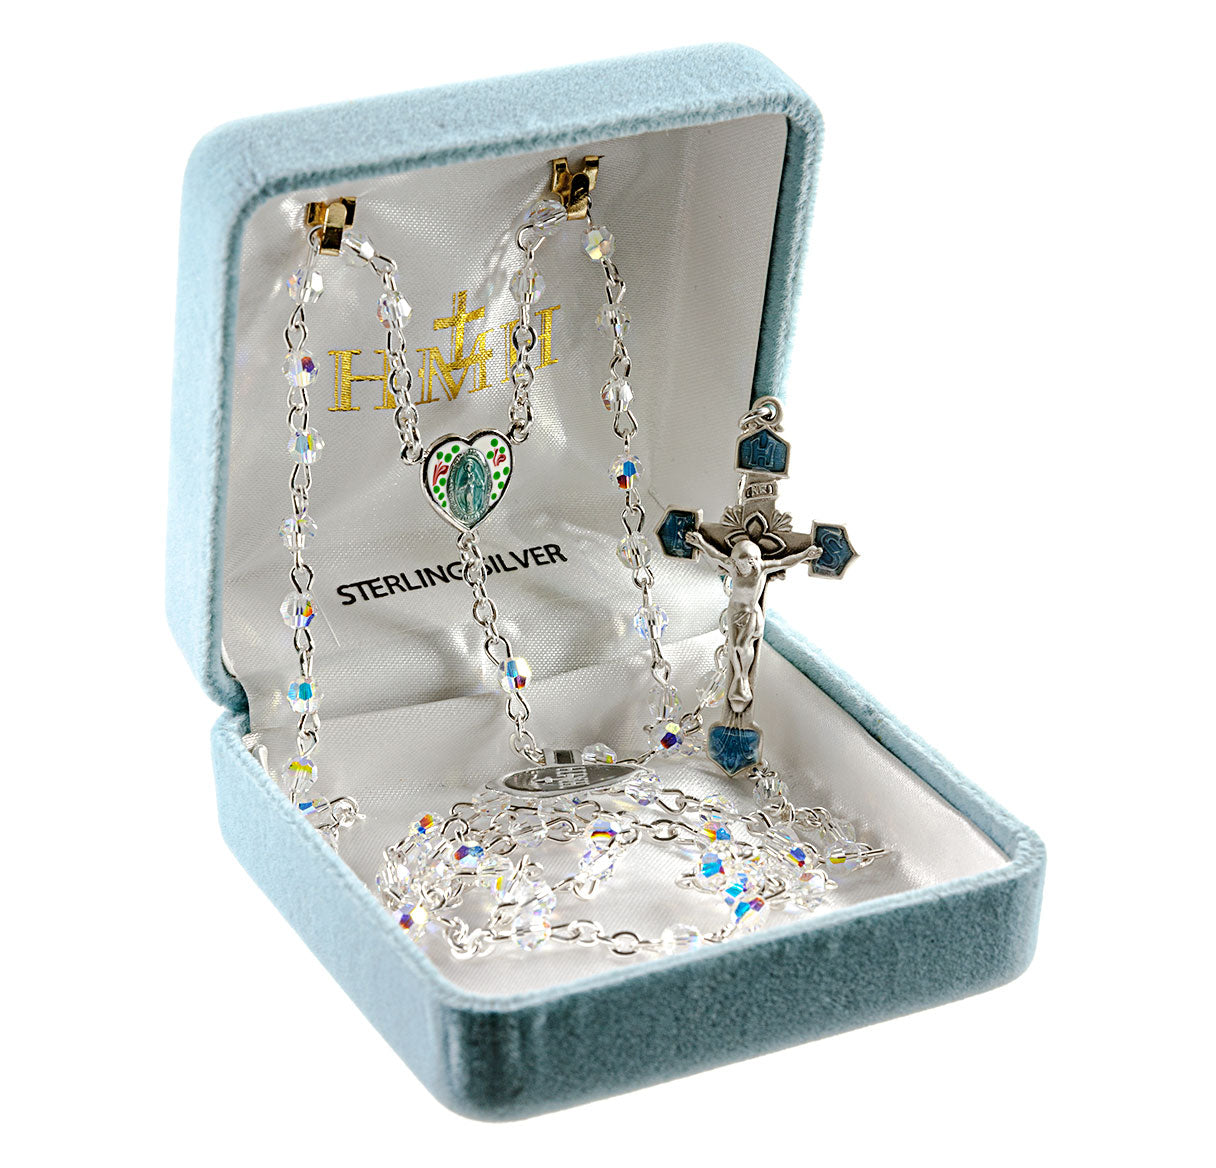 Rosary Sterling Crucifix and Centerpiece Created with Swarovski Crystal 4mm Aurora Borealis Beads by HMH